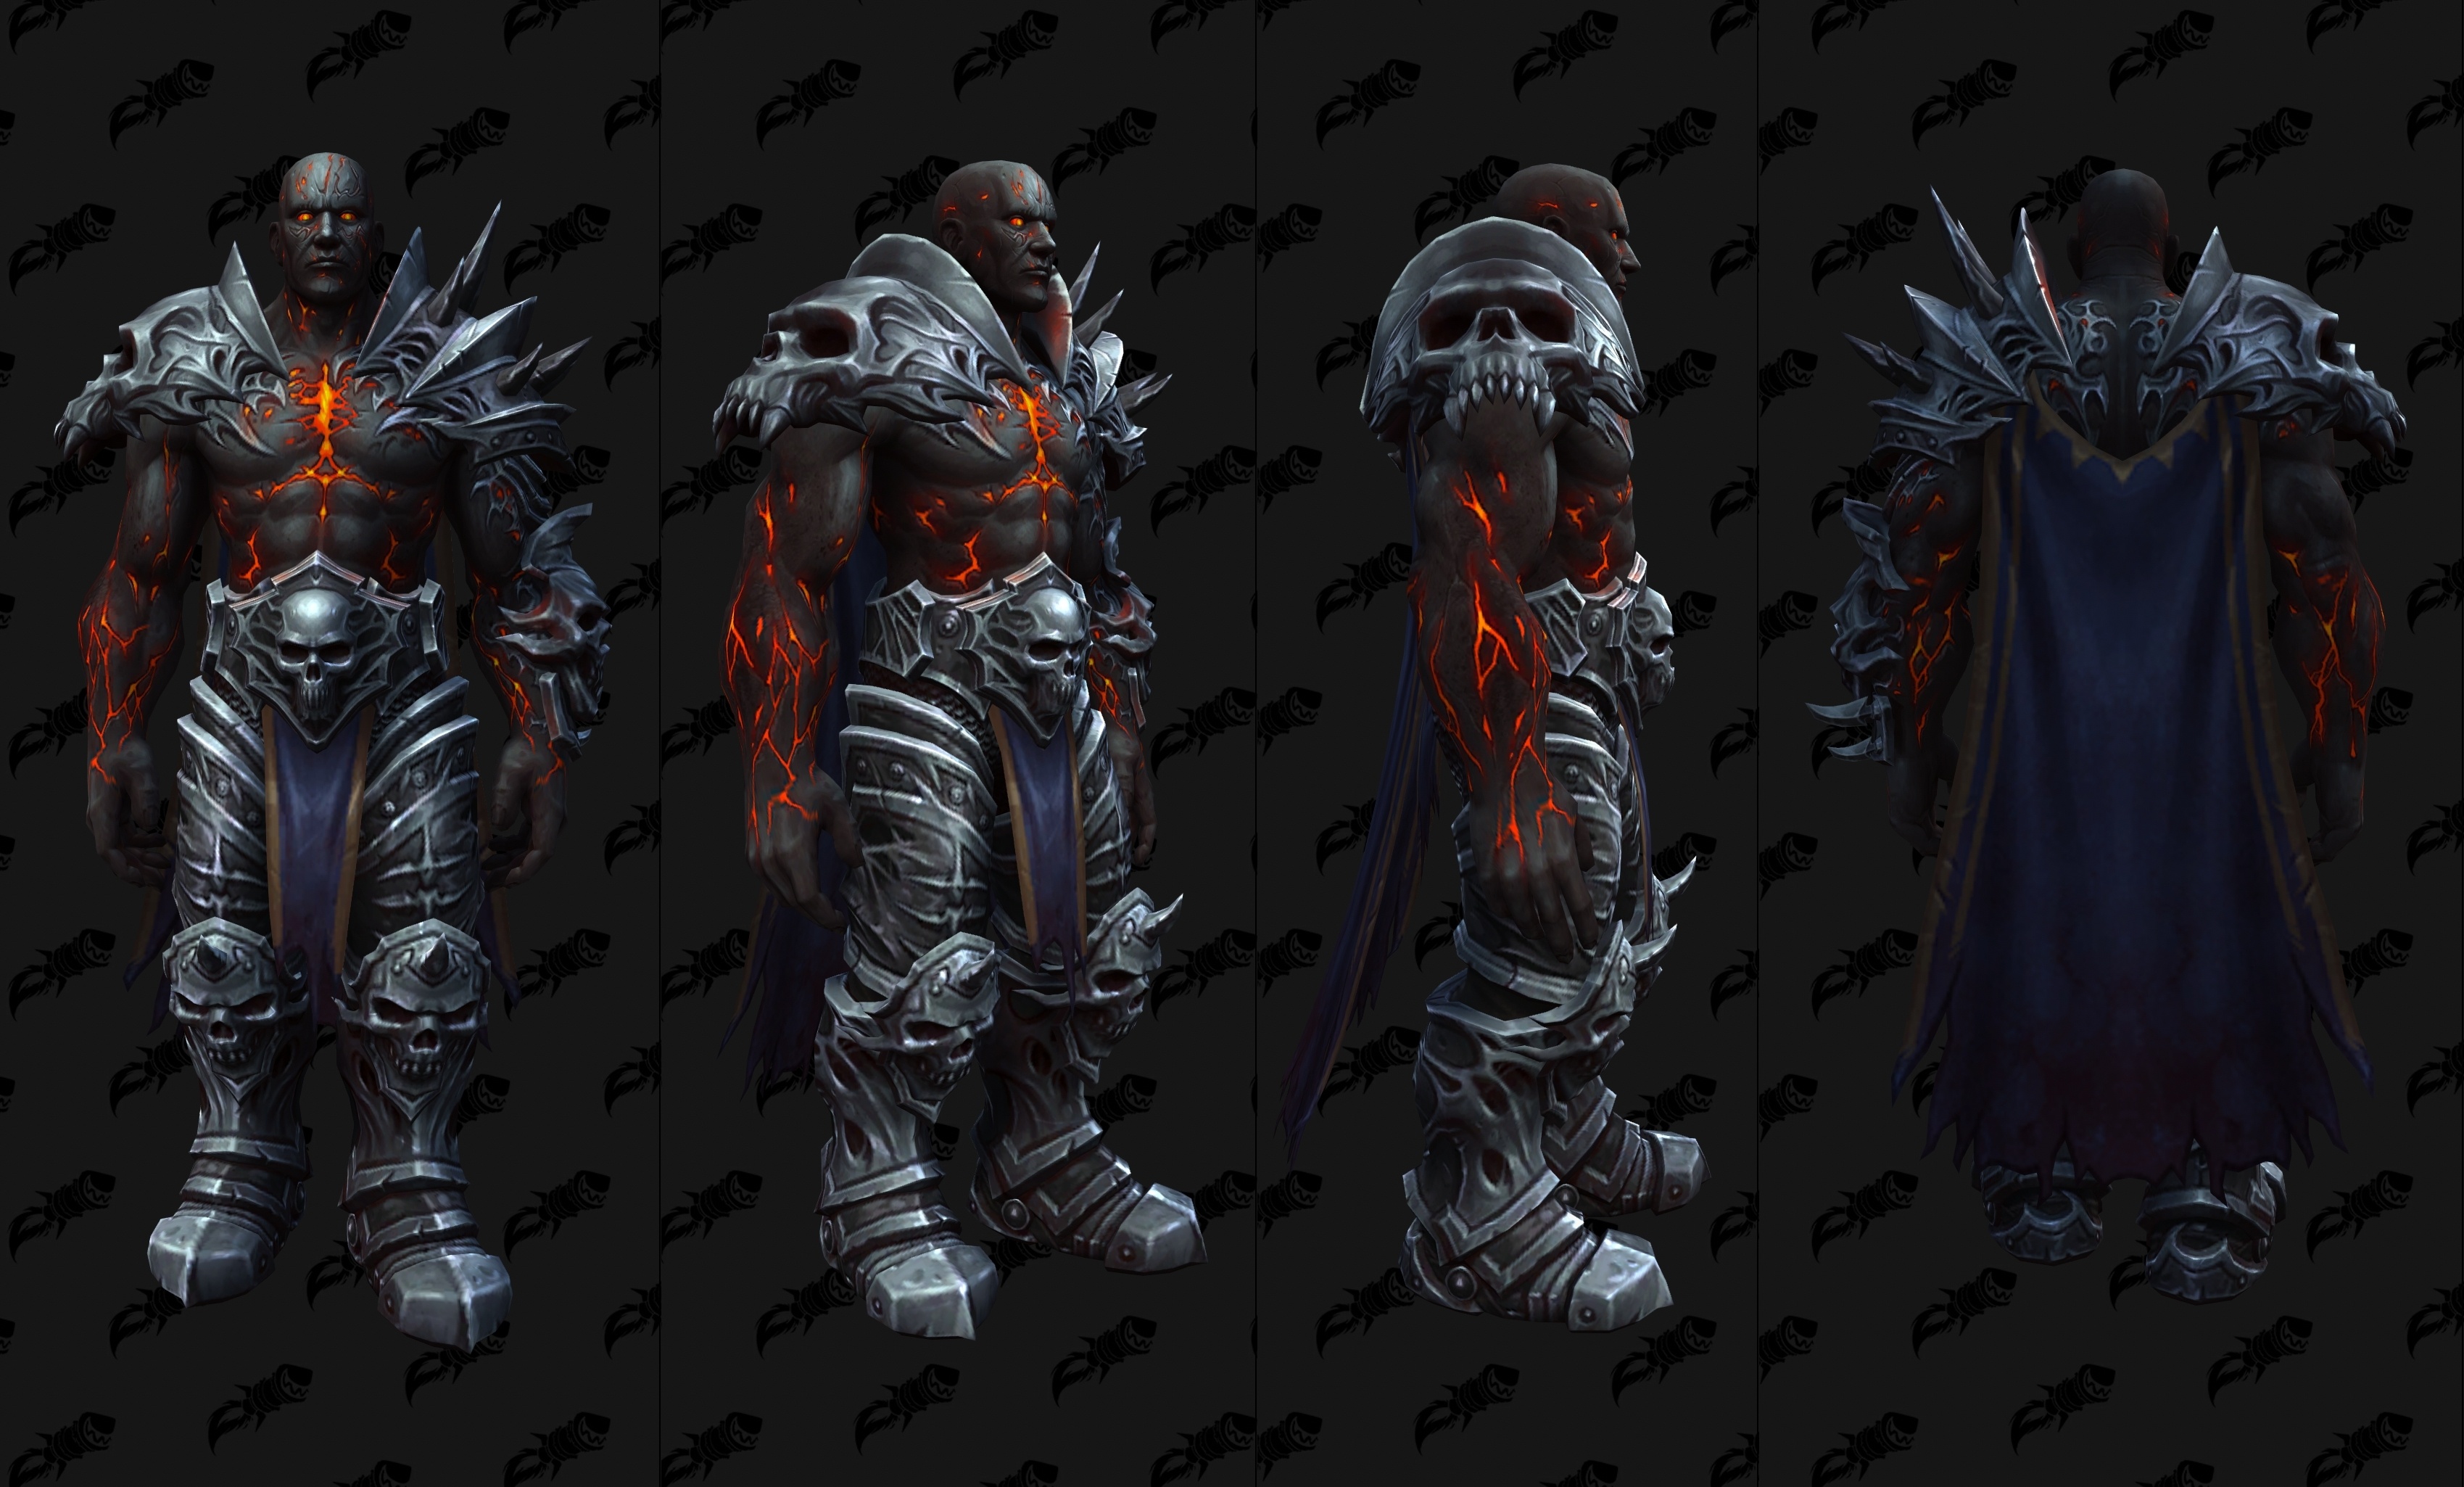 Datamining reveals a potential Blood Knight class for Diablo